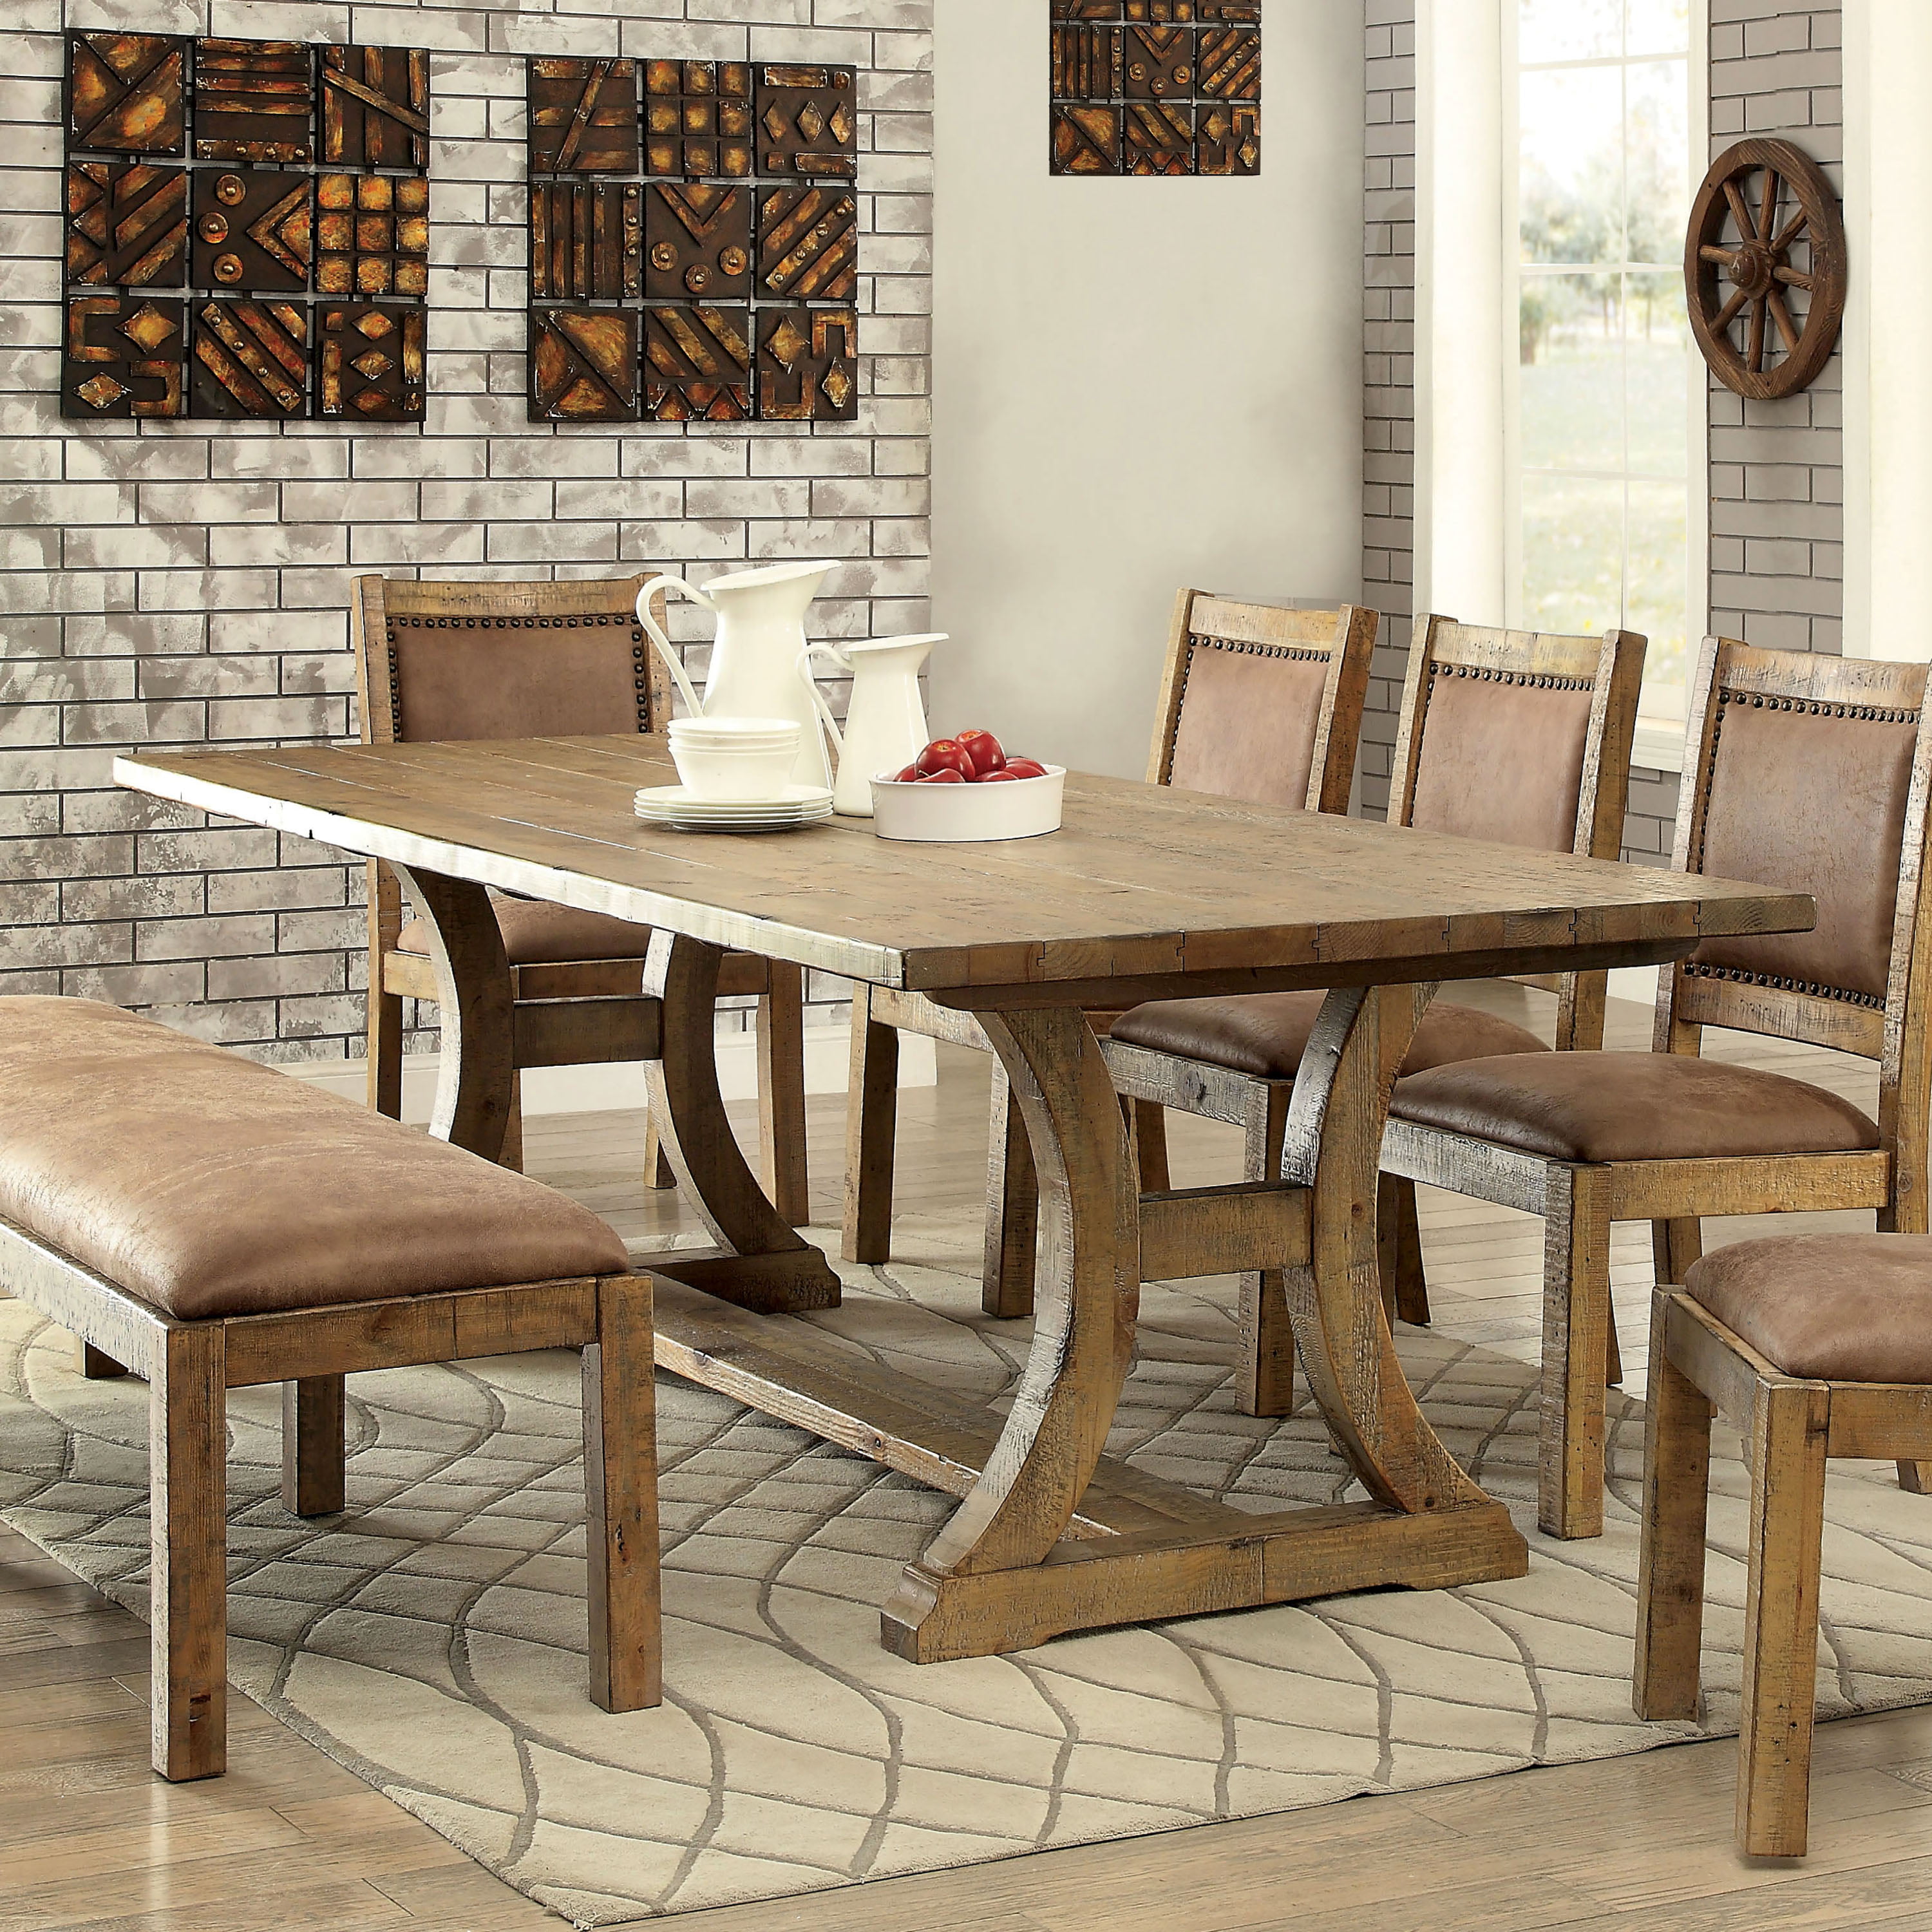 Affordable Rustic Dining Table Sets